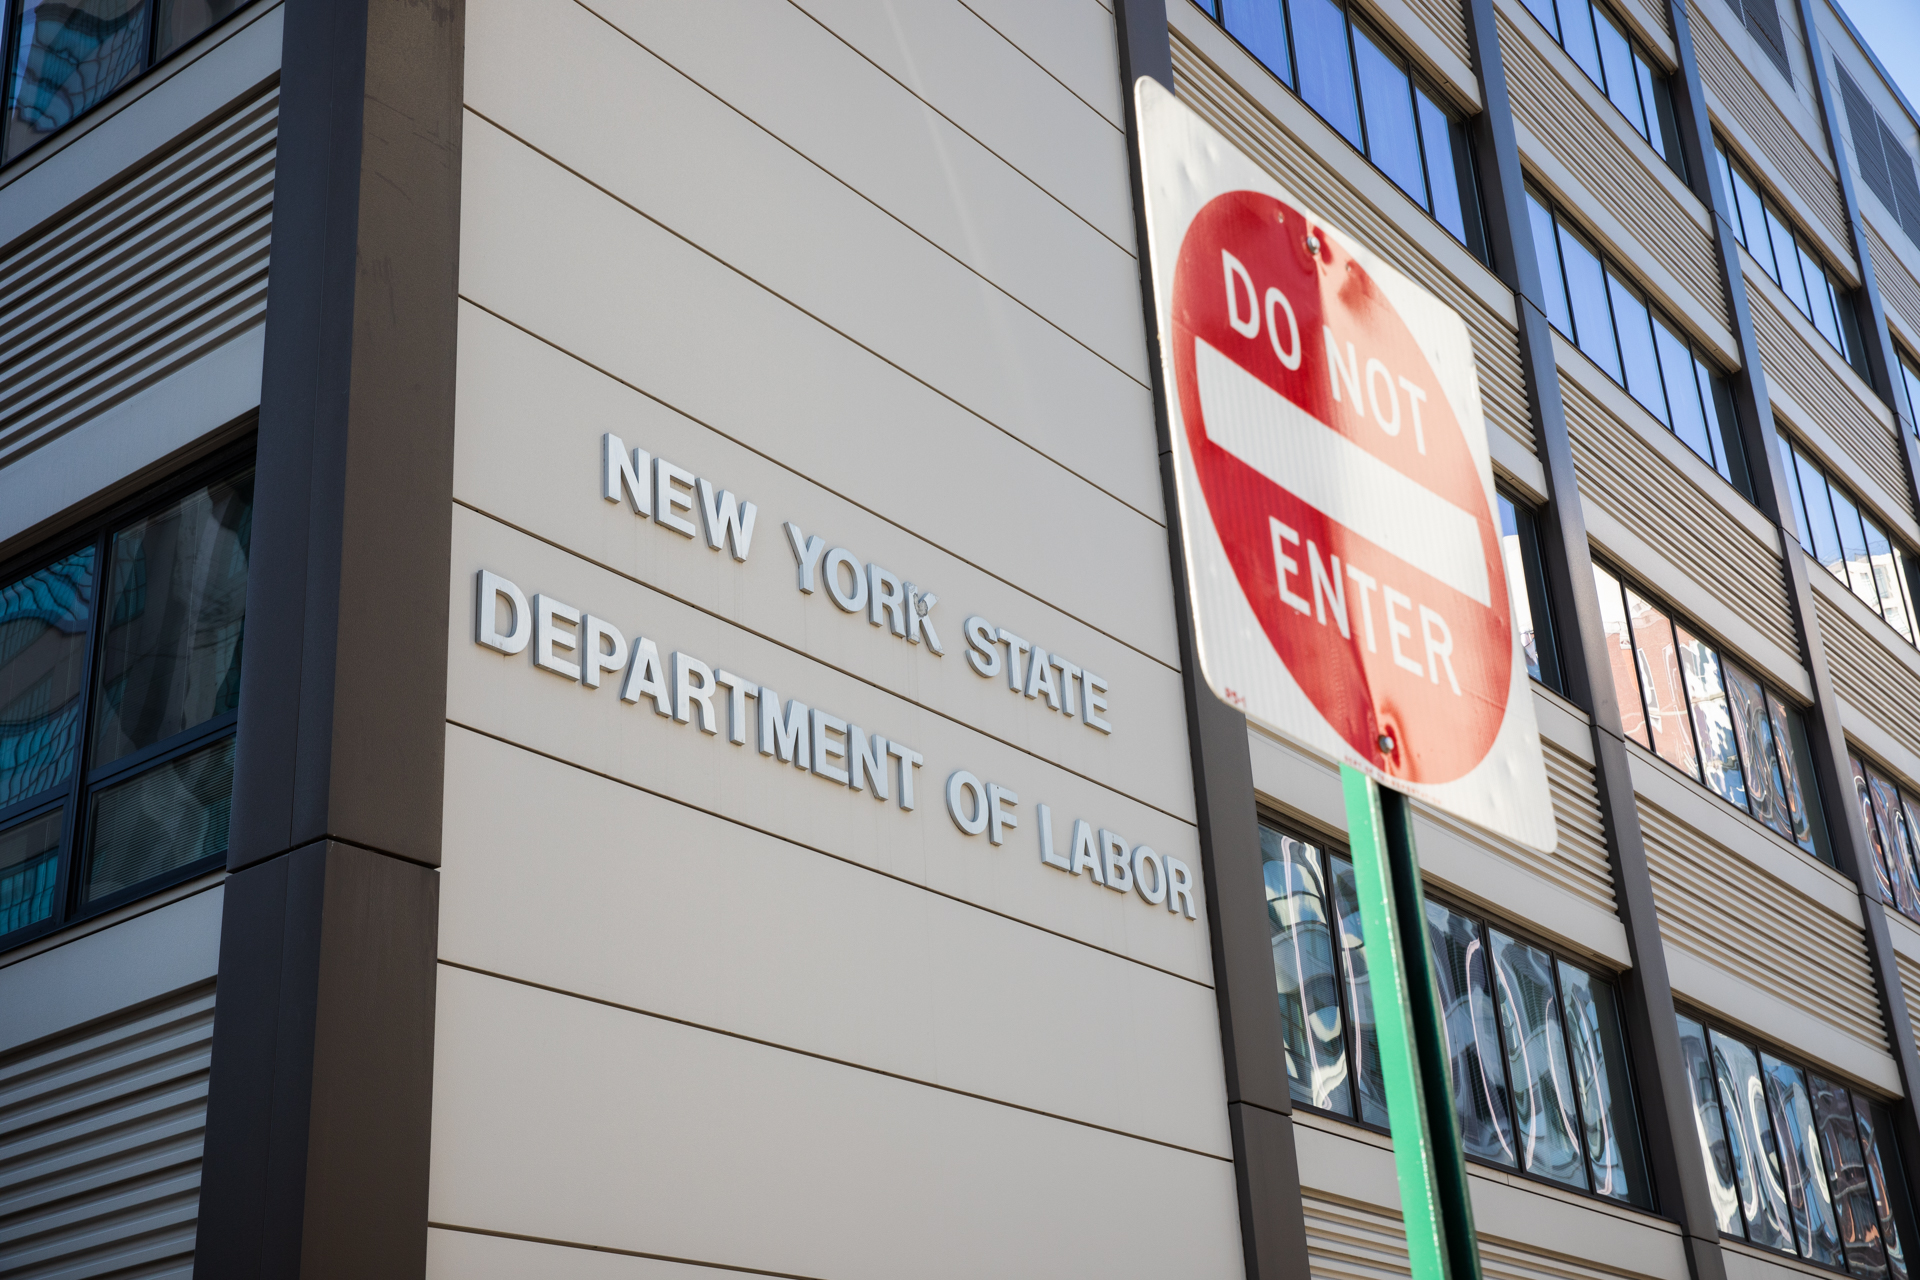 Unemployment Insurance Services offices at 250 Schermerhorn St. in Downtown Brooklyn. Photo: Paul Frangipane/Brooklyn Eagle